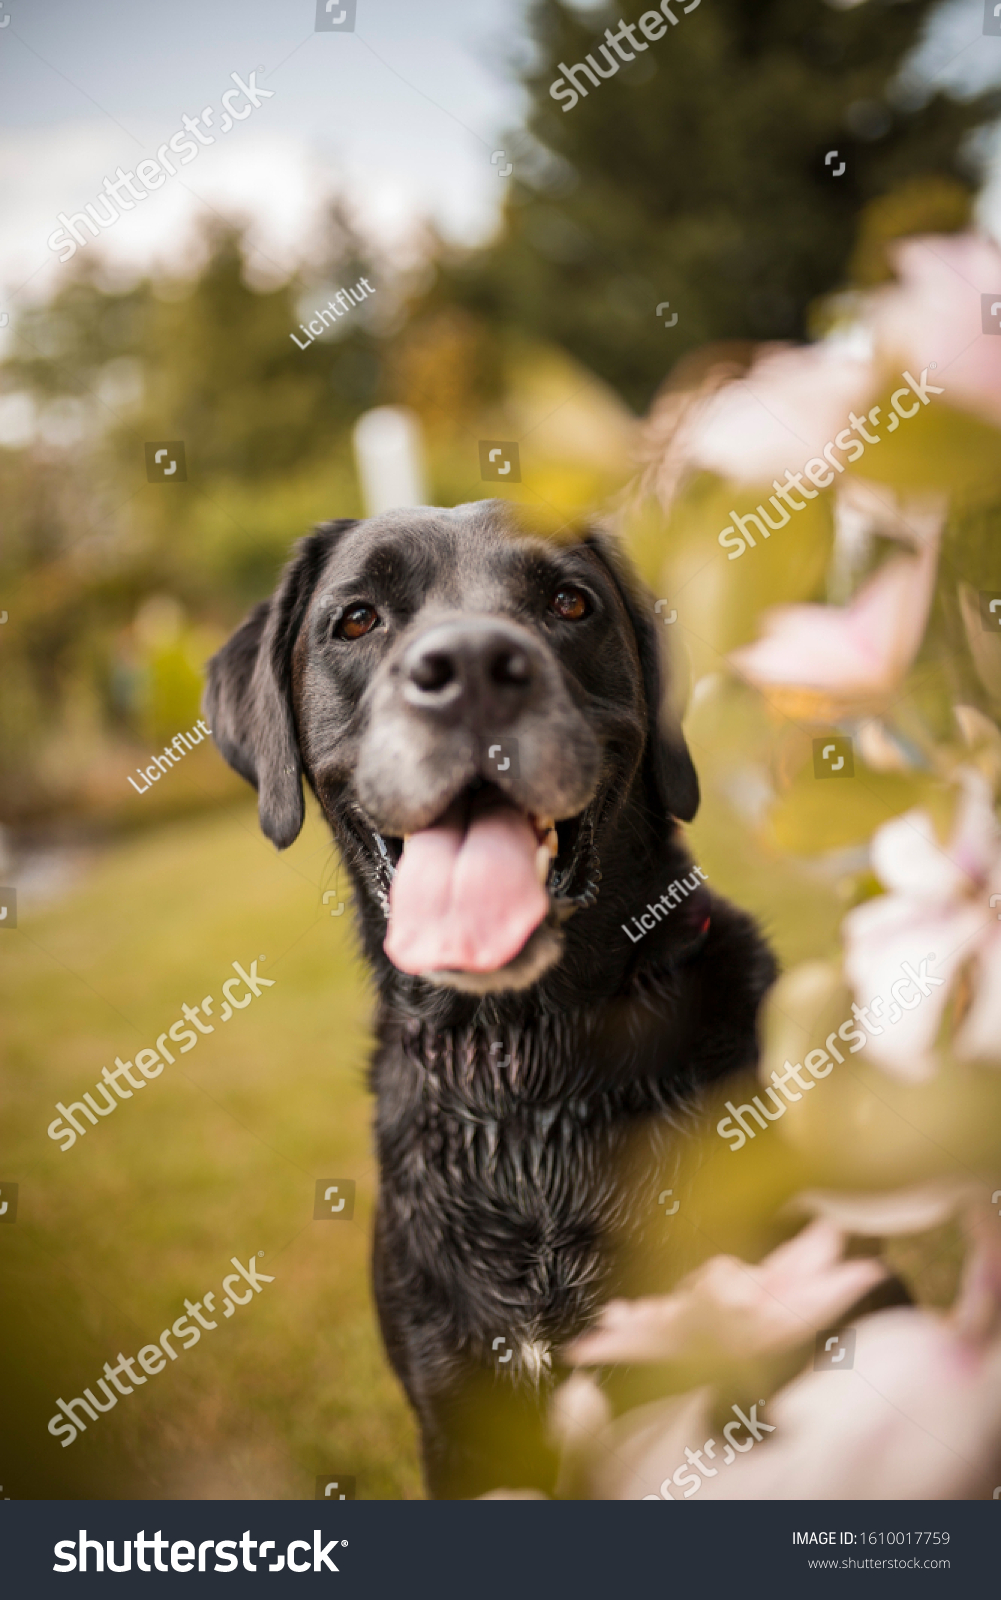 Black labrador retriever dog on a walk. Dog in the nature. Senior dog behind grass and forest. Old dog happy outside #1610017759